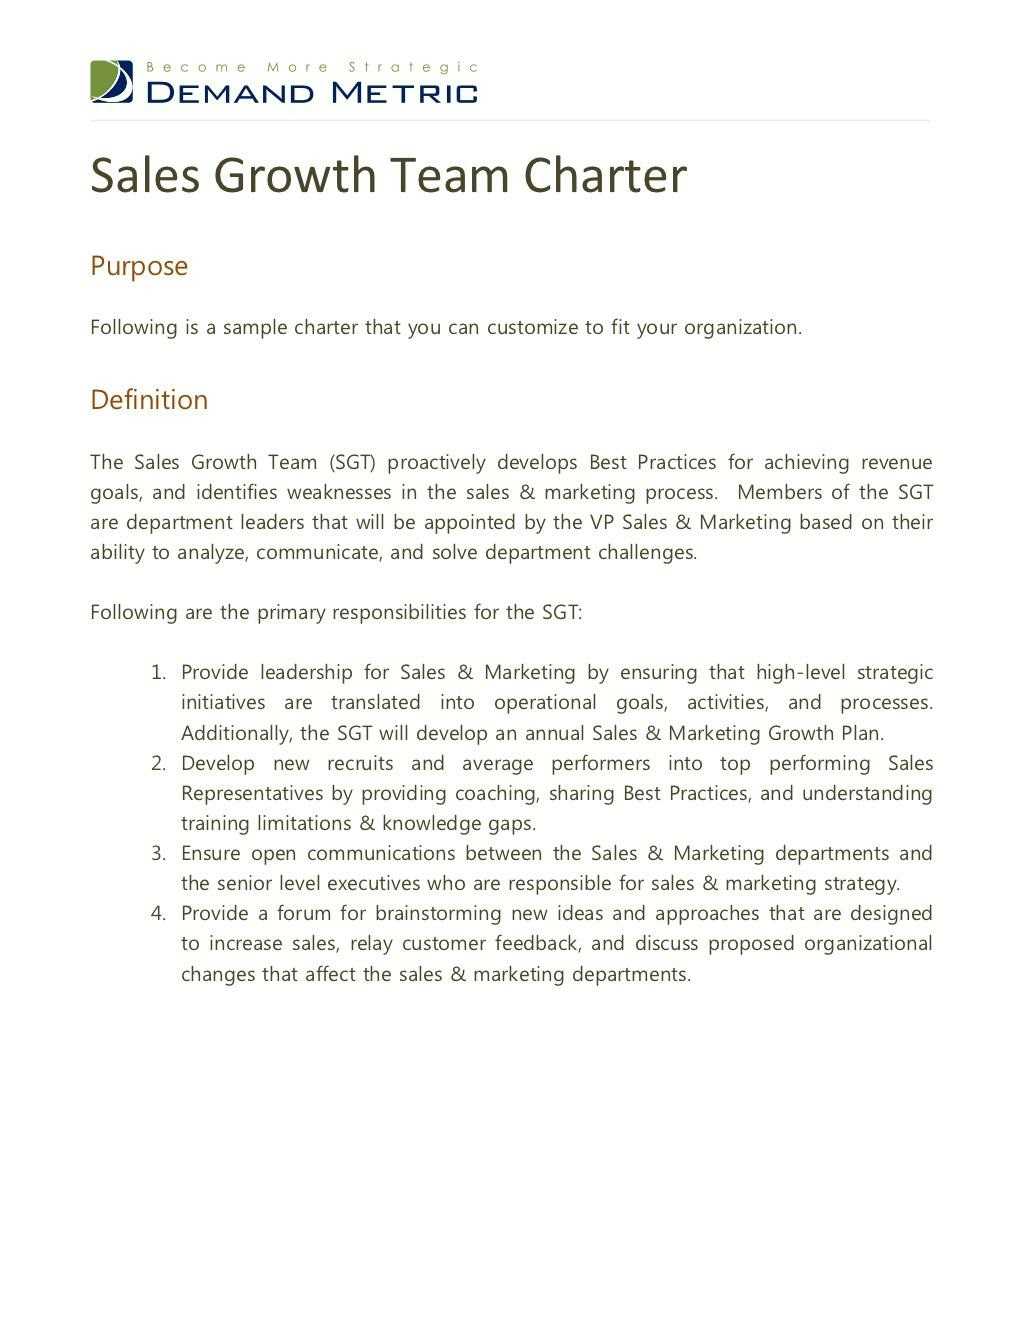 Ppt – Sales Growth Team Charter Powerpoint Presentation For Team Charter Template Powerpoint